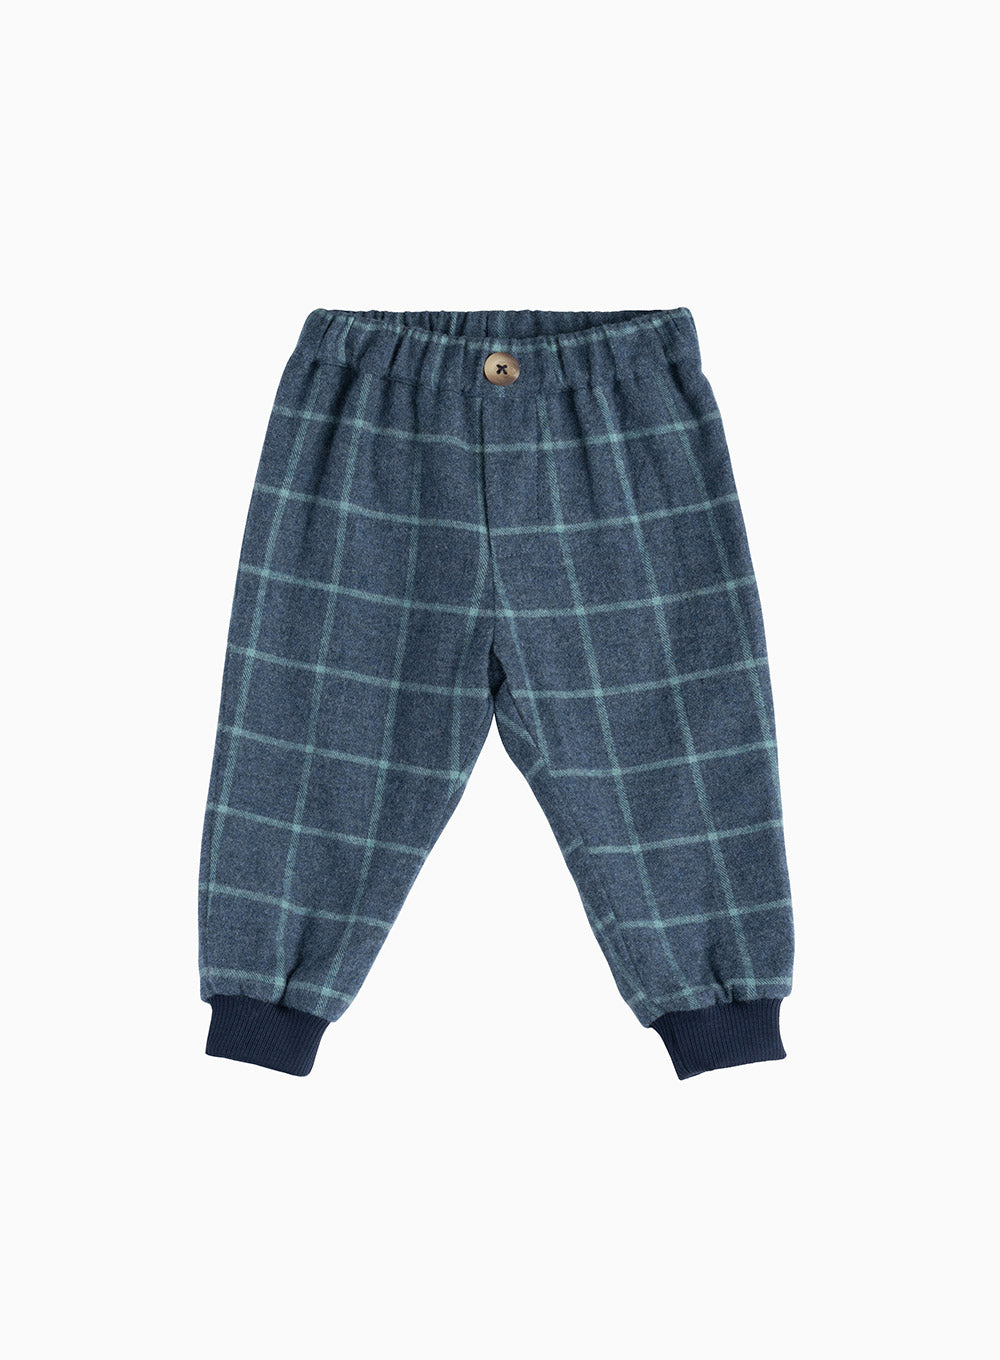 Burberry Baby Boys Darcy Blue Check Plaid Reversible Pants Trousers Size 6M  | eBay